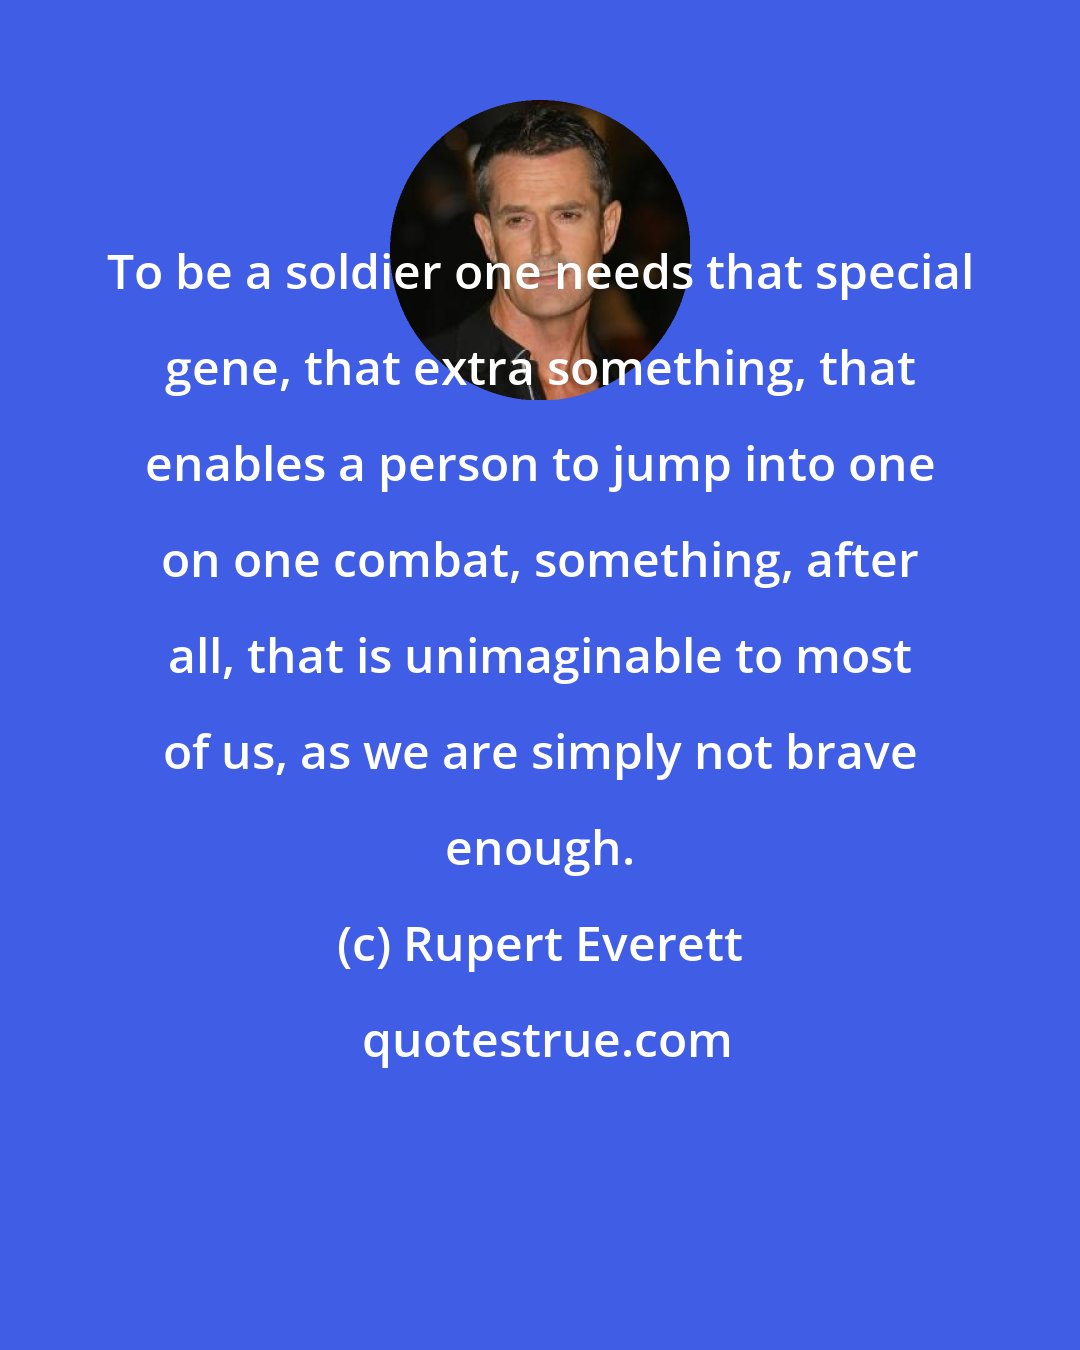 Rupert Everett: To be a soldier one needs that special gene, that extra something, that enables a person to jump into one on one combat, something, after all, that is unimaginable to most of us, as we are simply not brave enough.